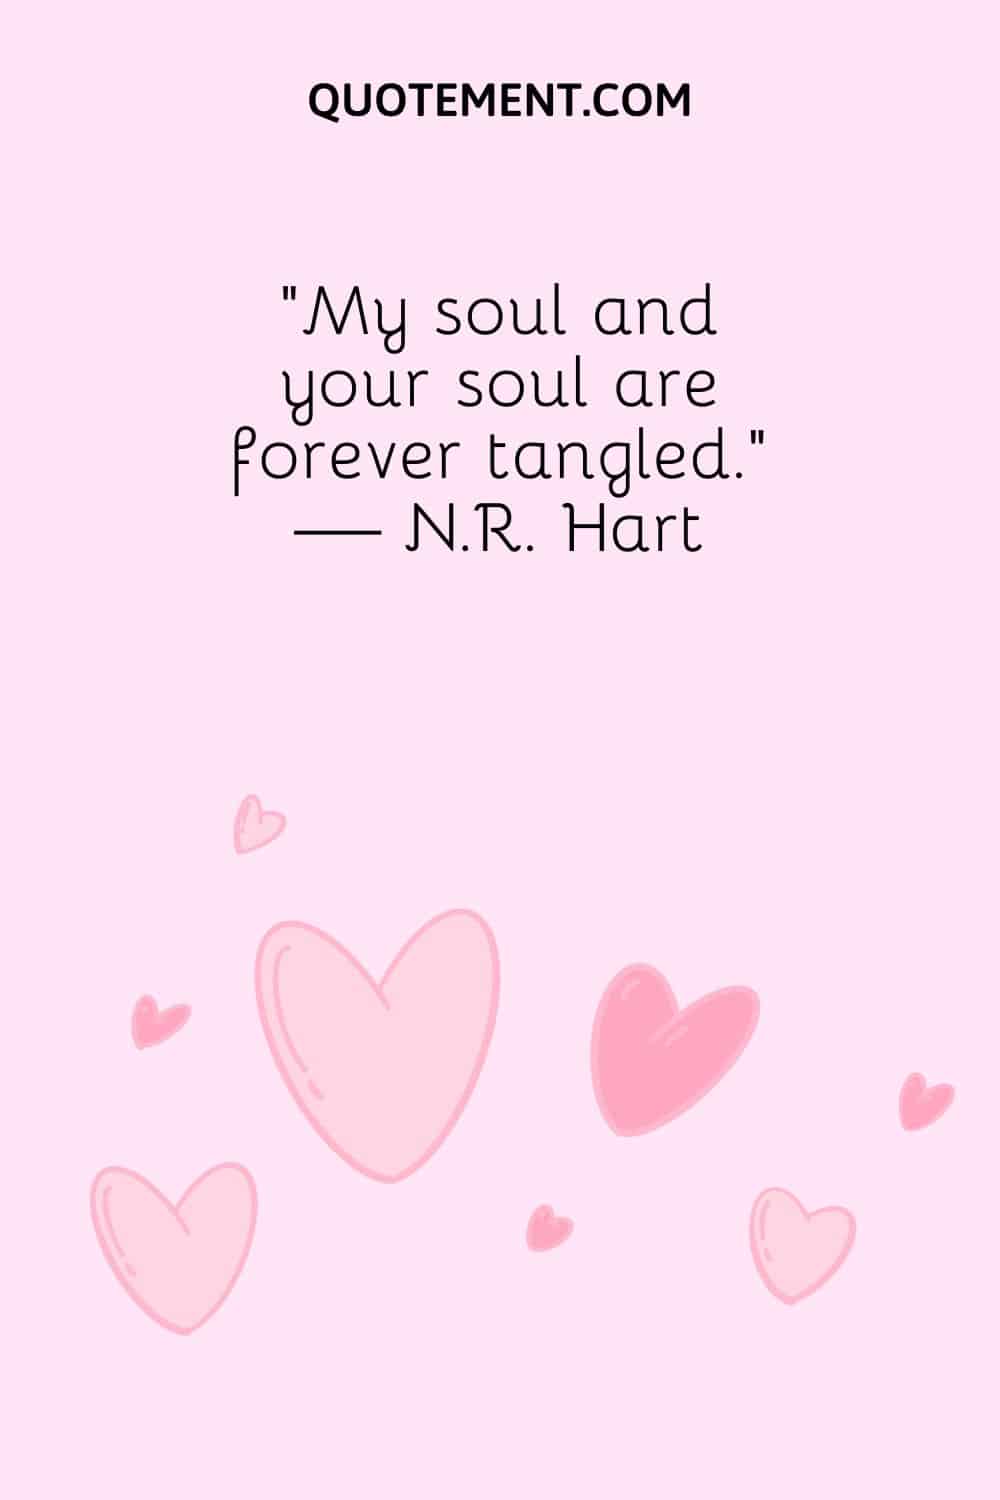 “My soul and your soul are forever tangled.” — N.R. Hart